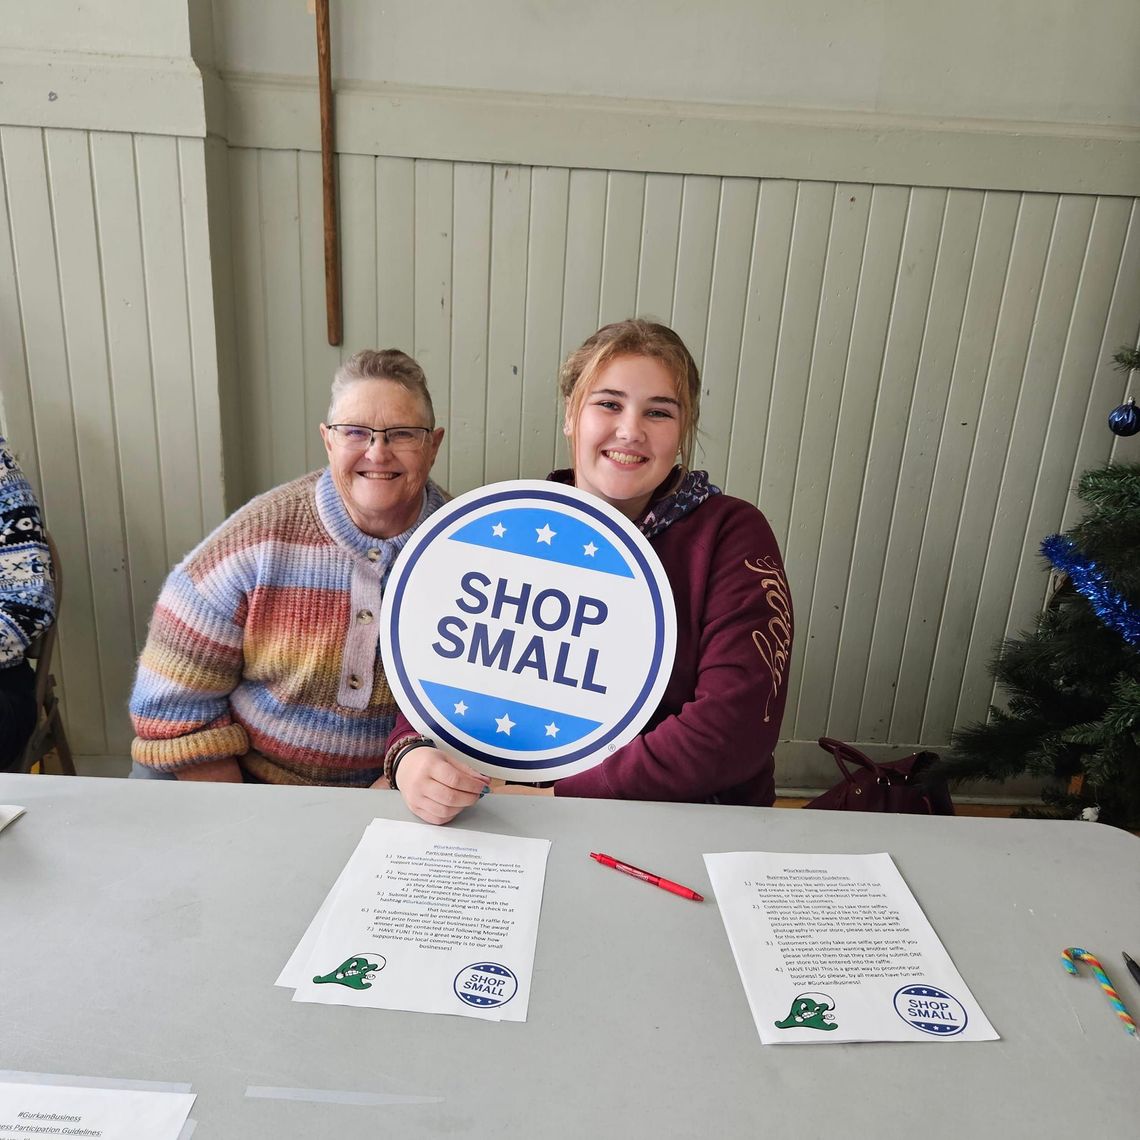 Fallon is Open for Business – Small Business Saturday Kicks Off Local Holiday Shopping